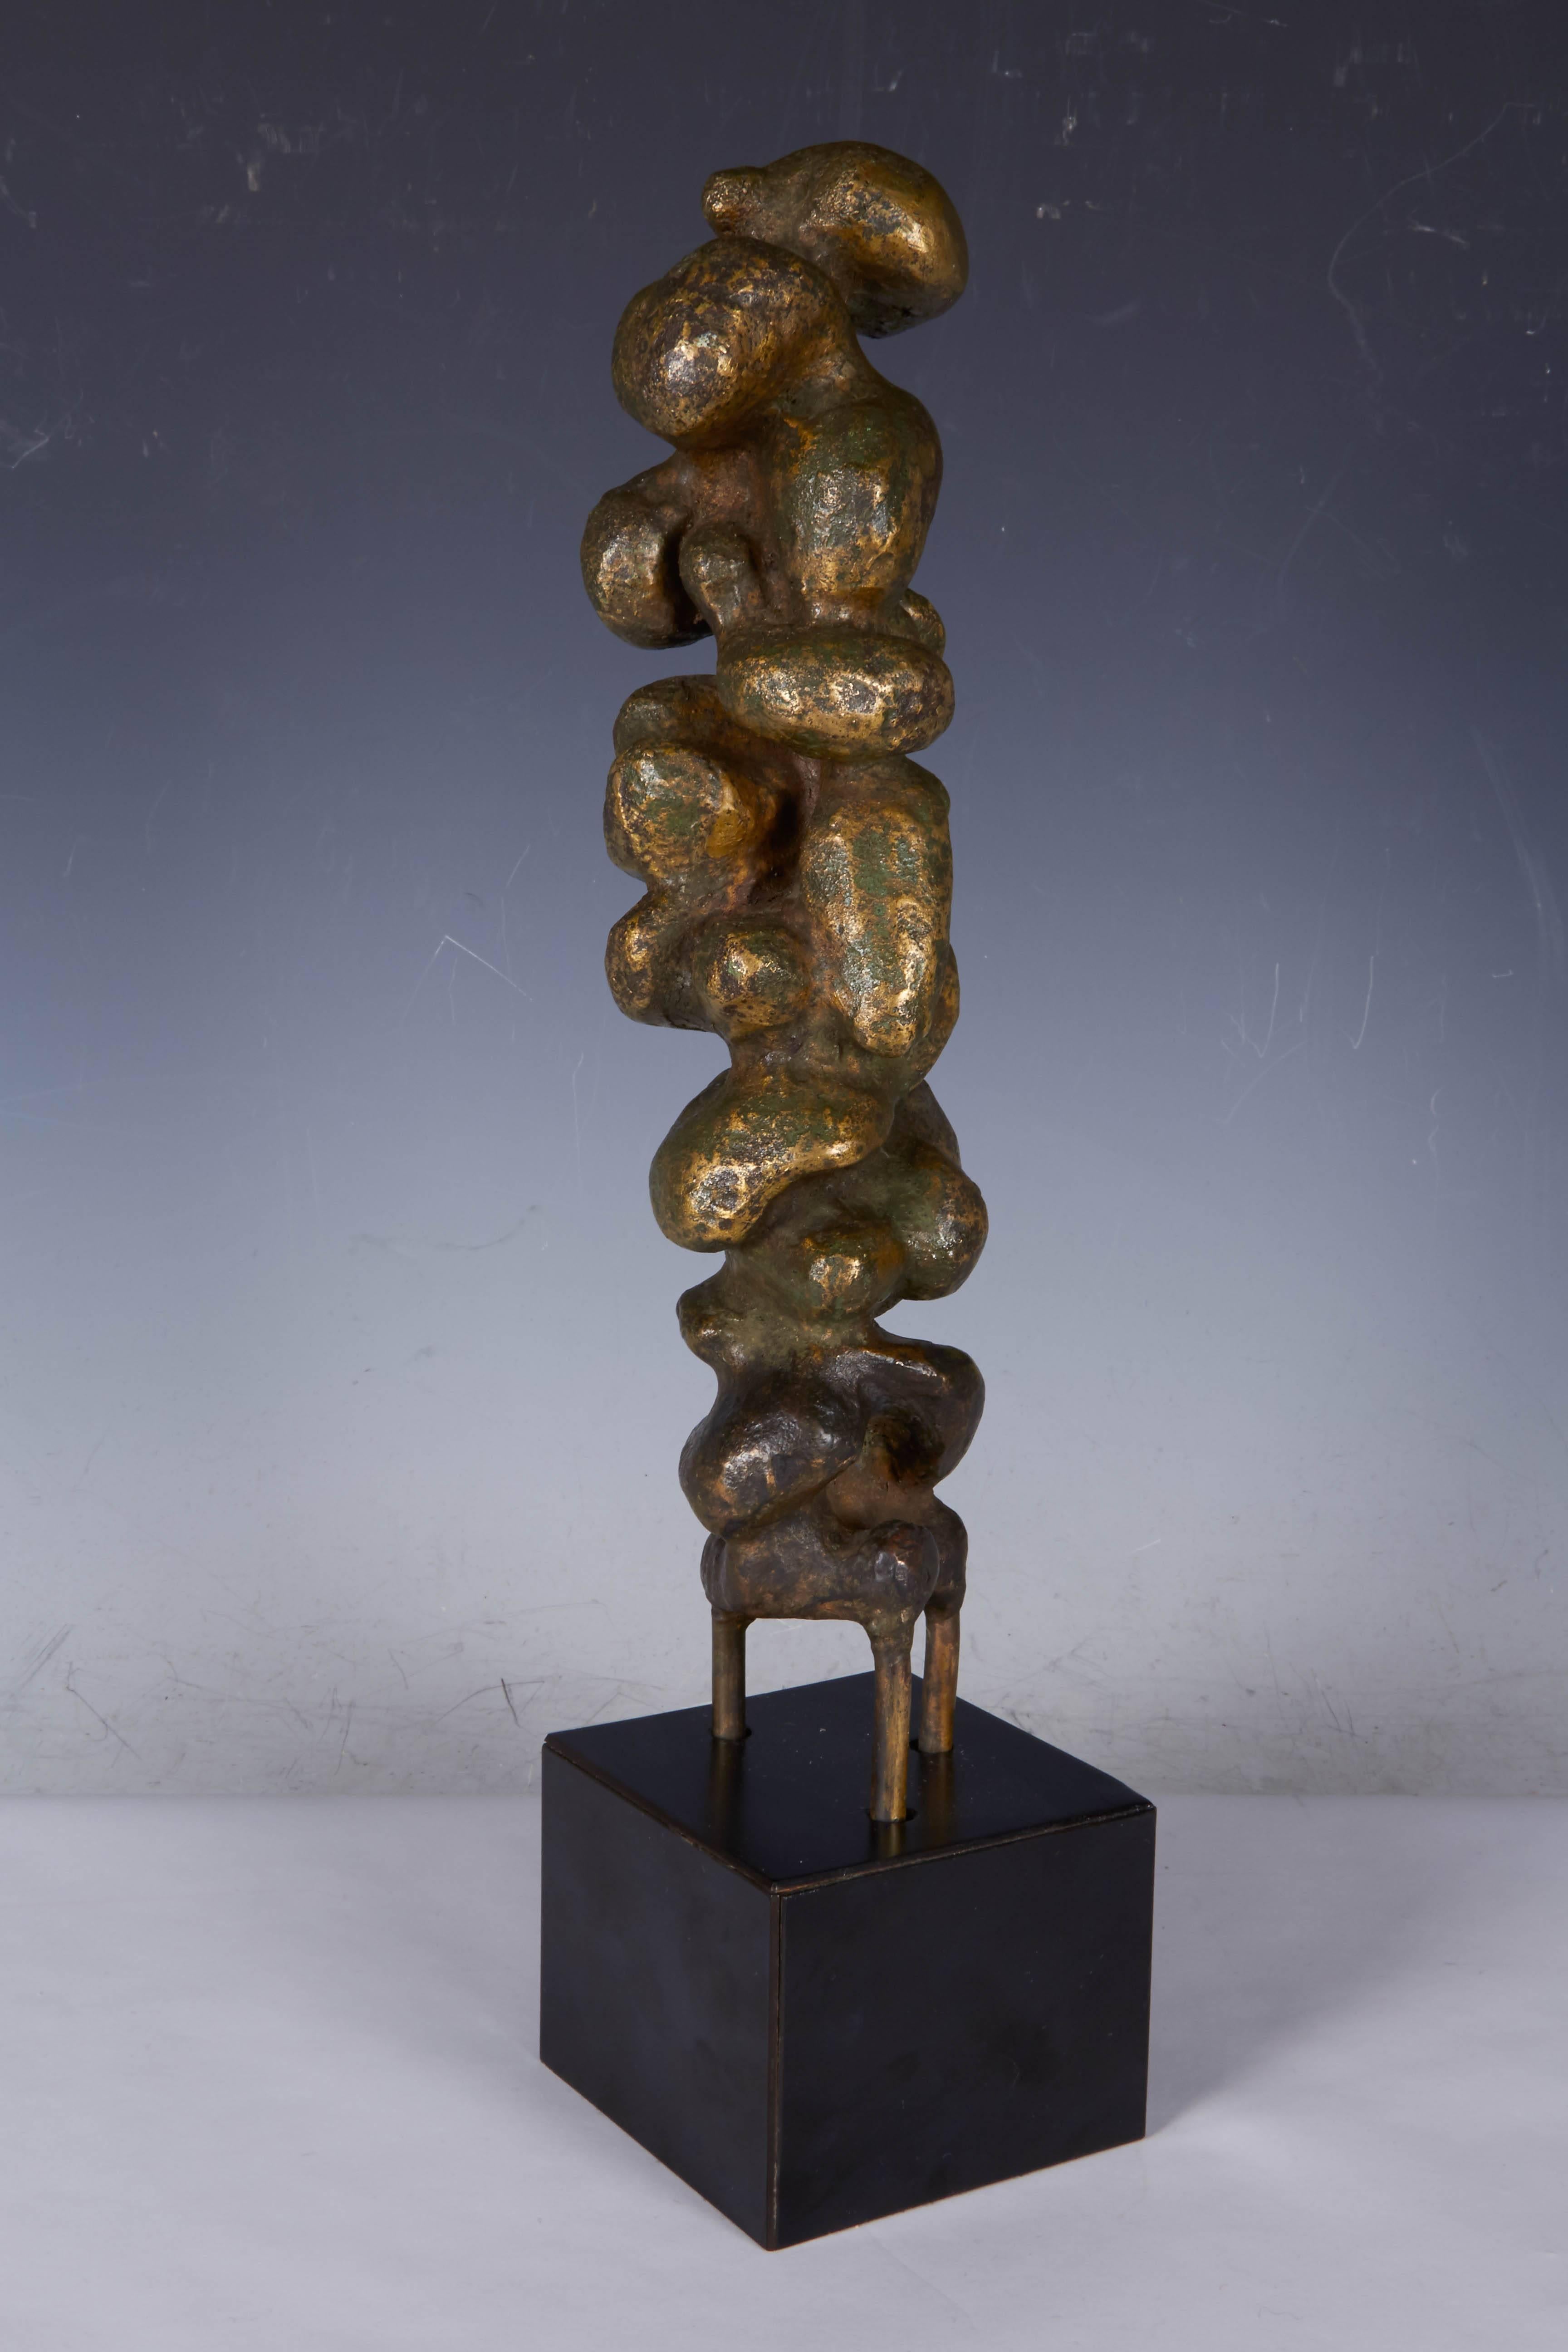 Patinated Adolfo Passarella Brutalist Abstract Bronze Sculpture, Signed and Dated